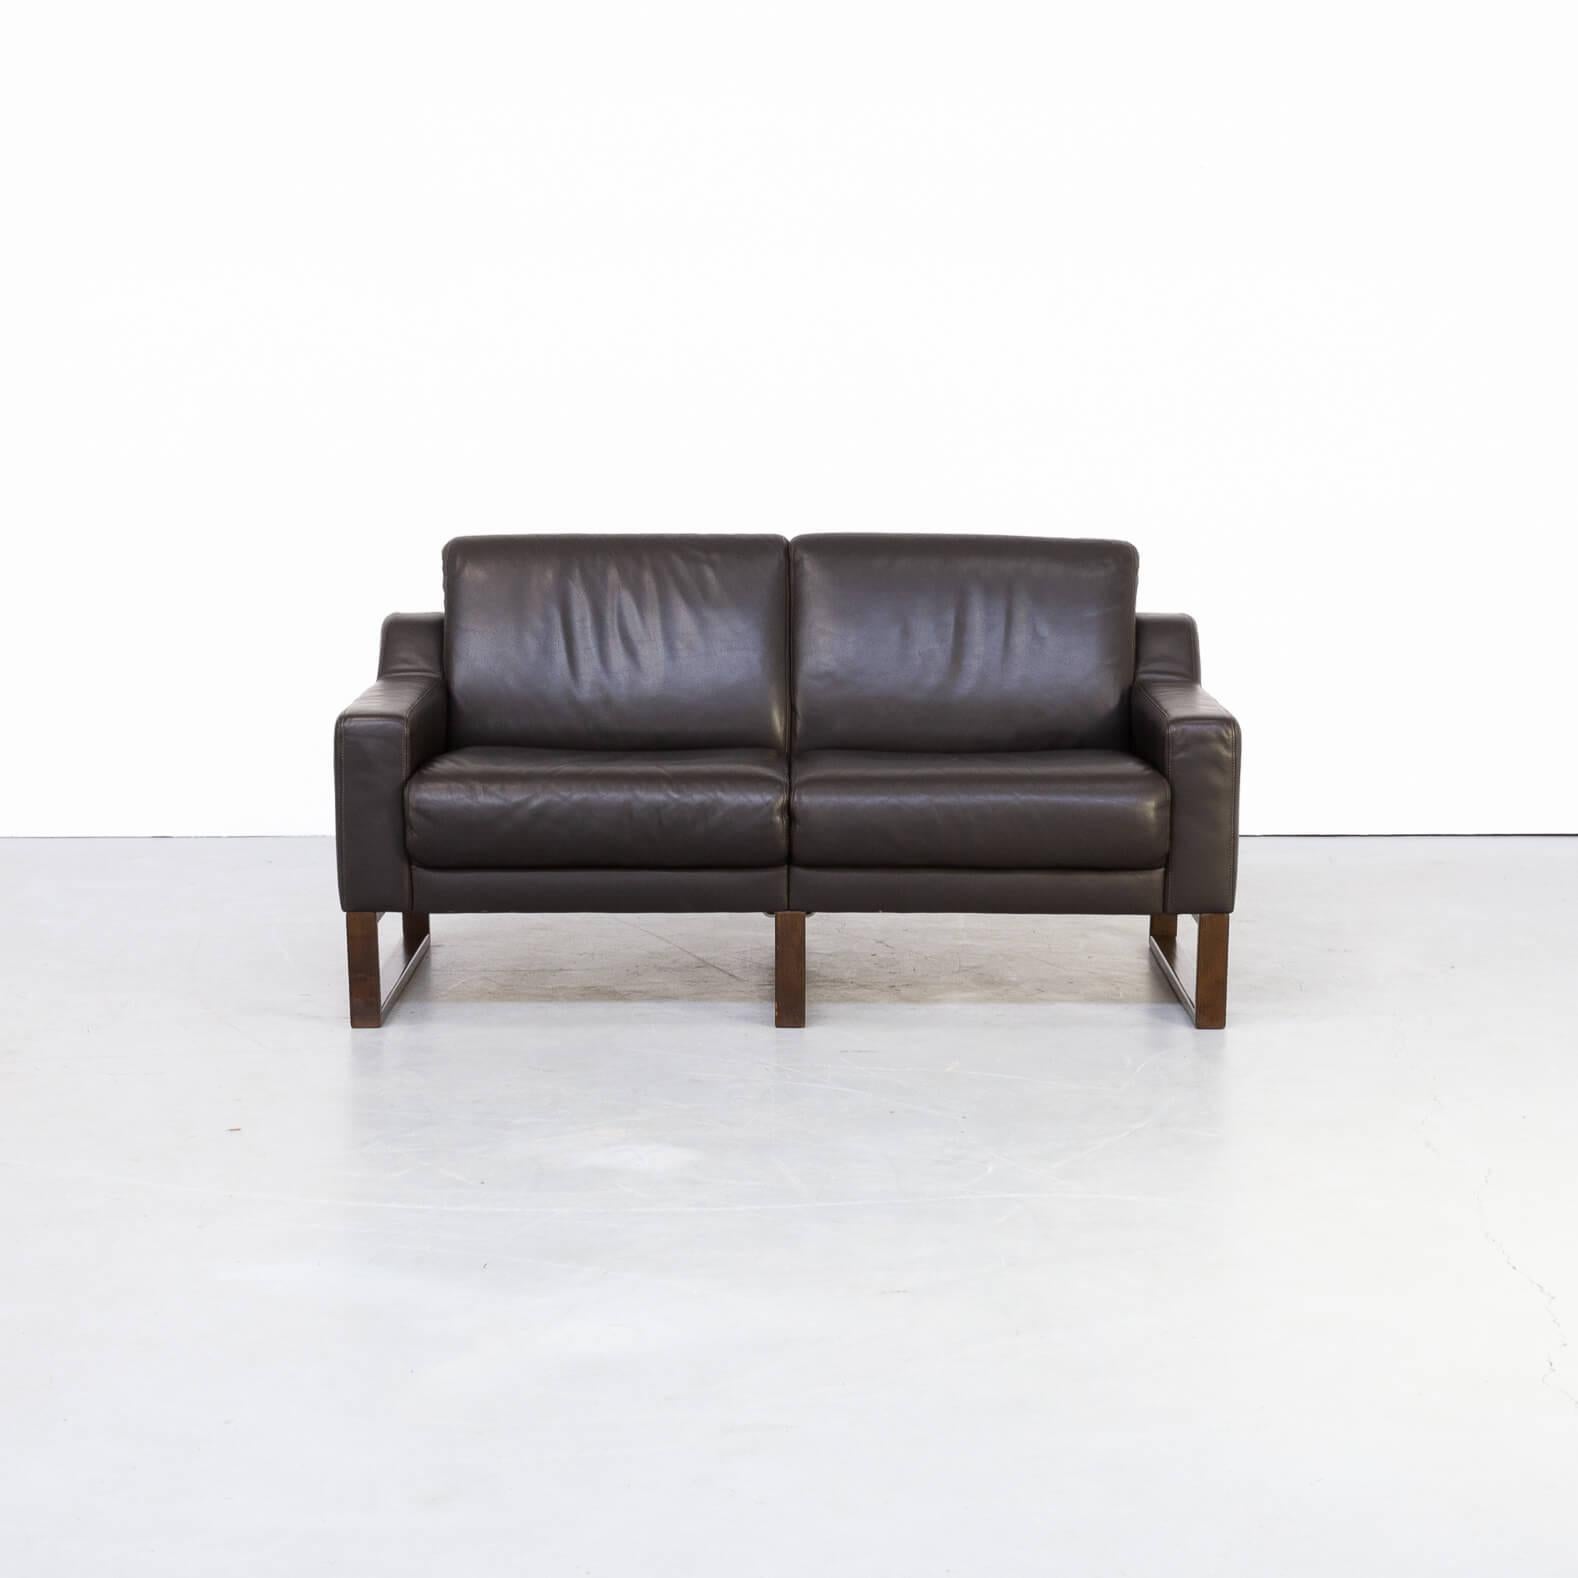 Beautiful brown leather two-seat sofa. The sofa has a wooden frame on which the comfortable leather seating is based. Gives a great spacious look and feel. The set is in good condition consistent with age and use!